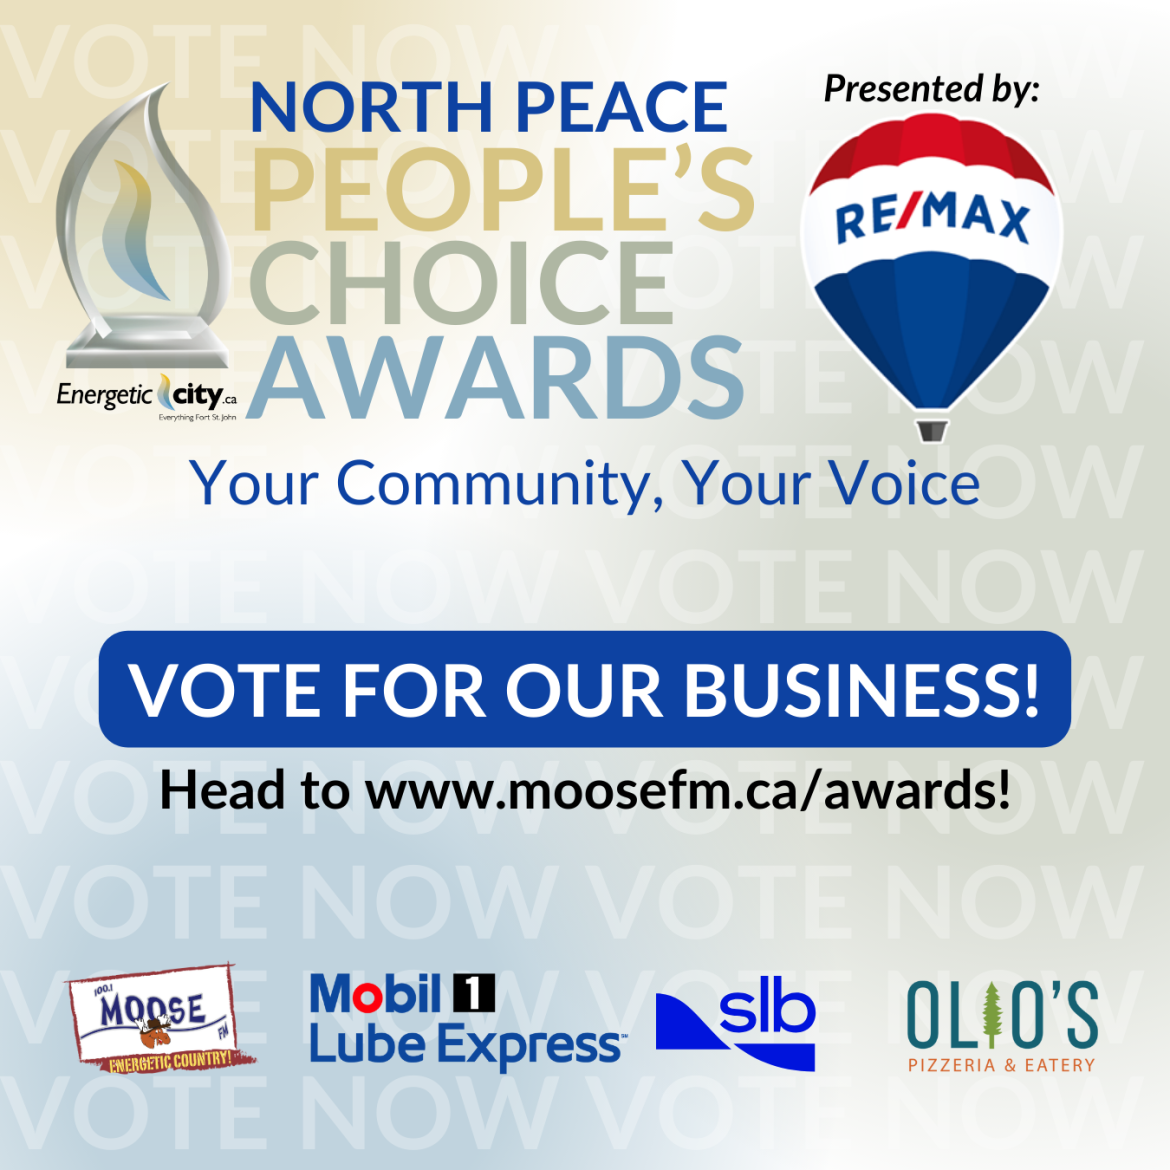 North Peace People's Choice Awards Vote for Our Business